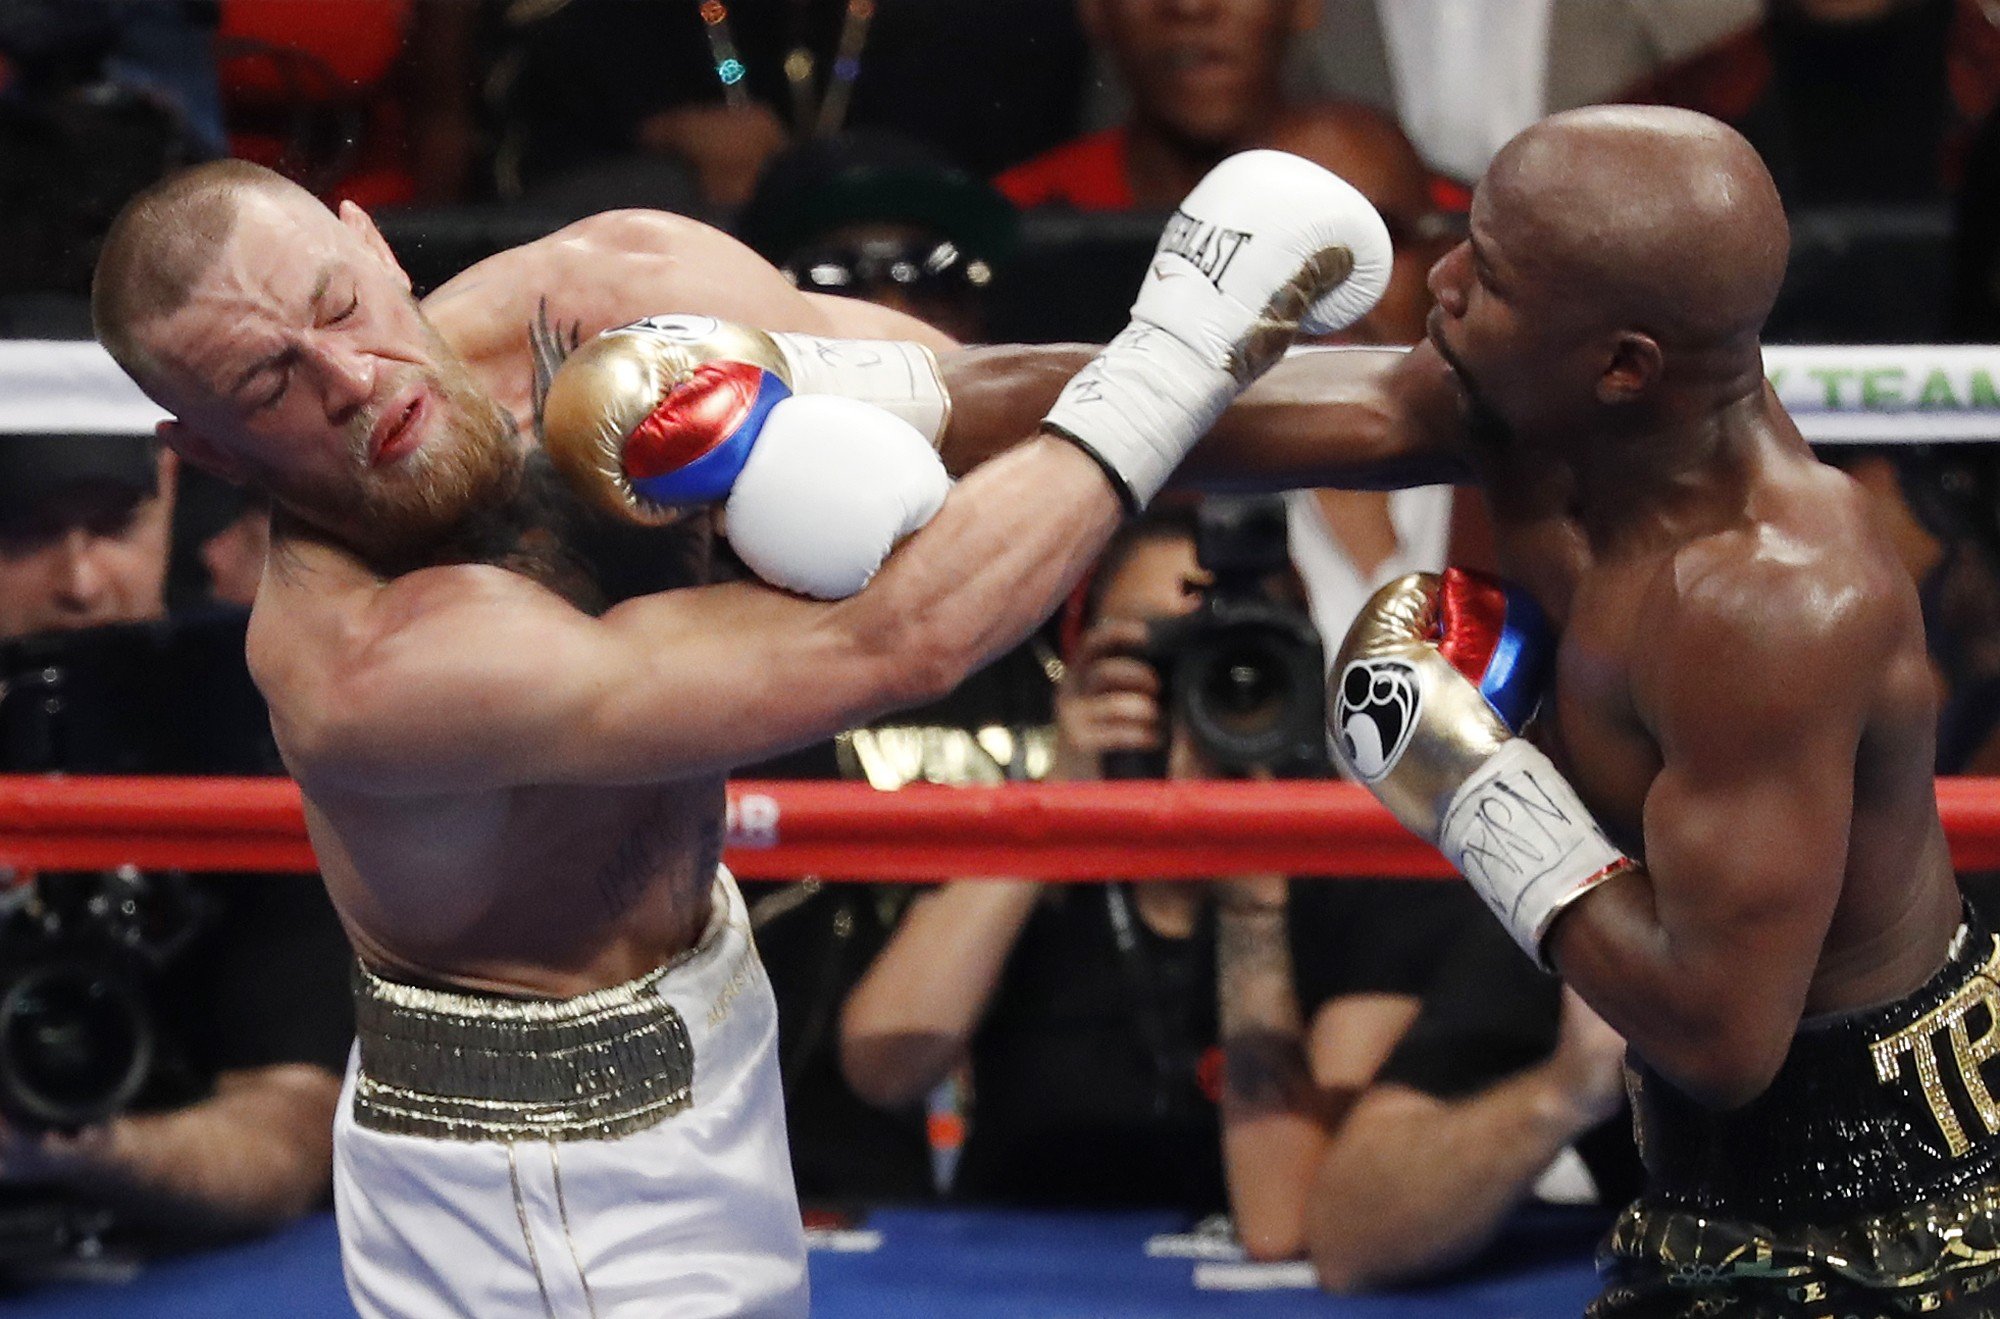 Floyd Mayweather Jnr (right) hits Conor McGregor with a right straight during their boxing crossover fight in Las Vegas in 2017. Photo: AP